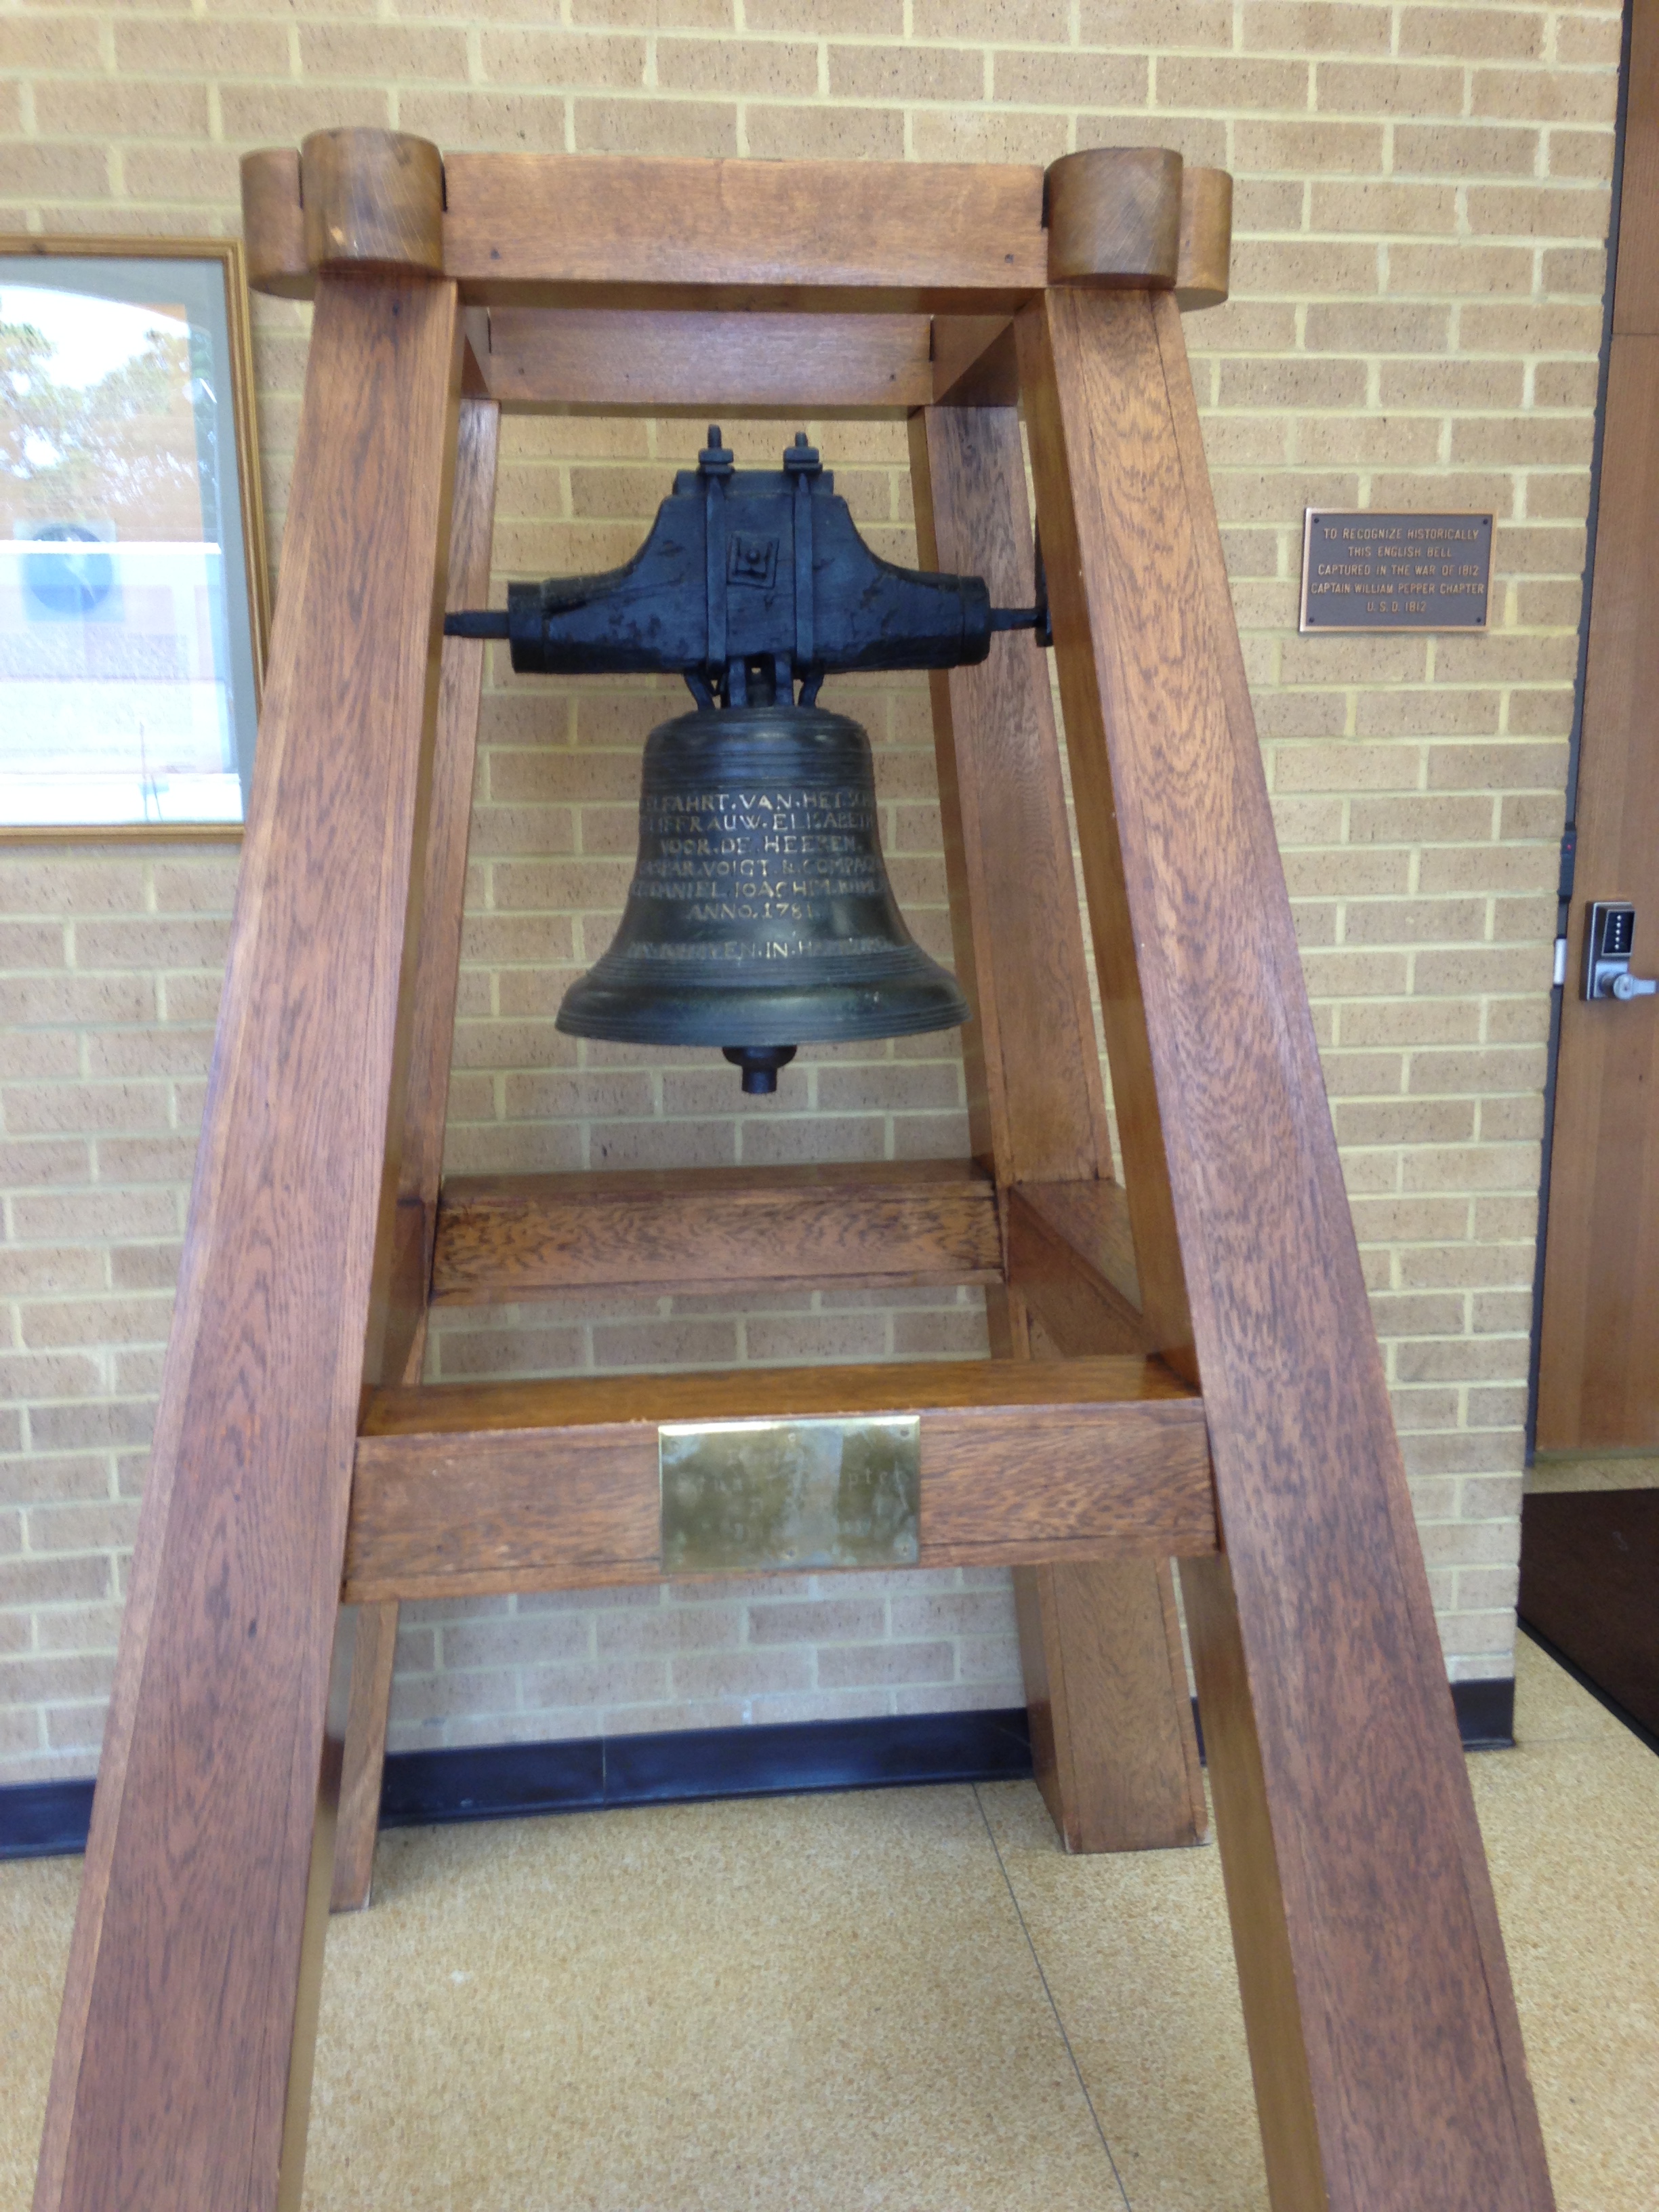 Wythe County Courthouse Bell: Captured from British Warship